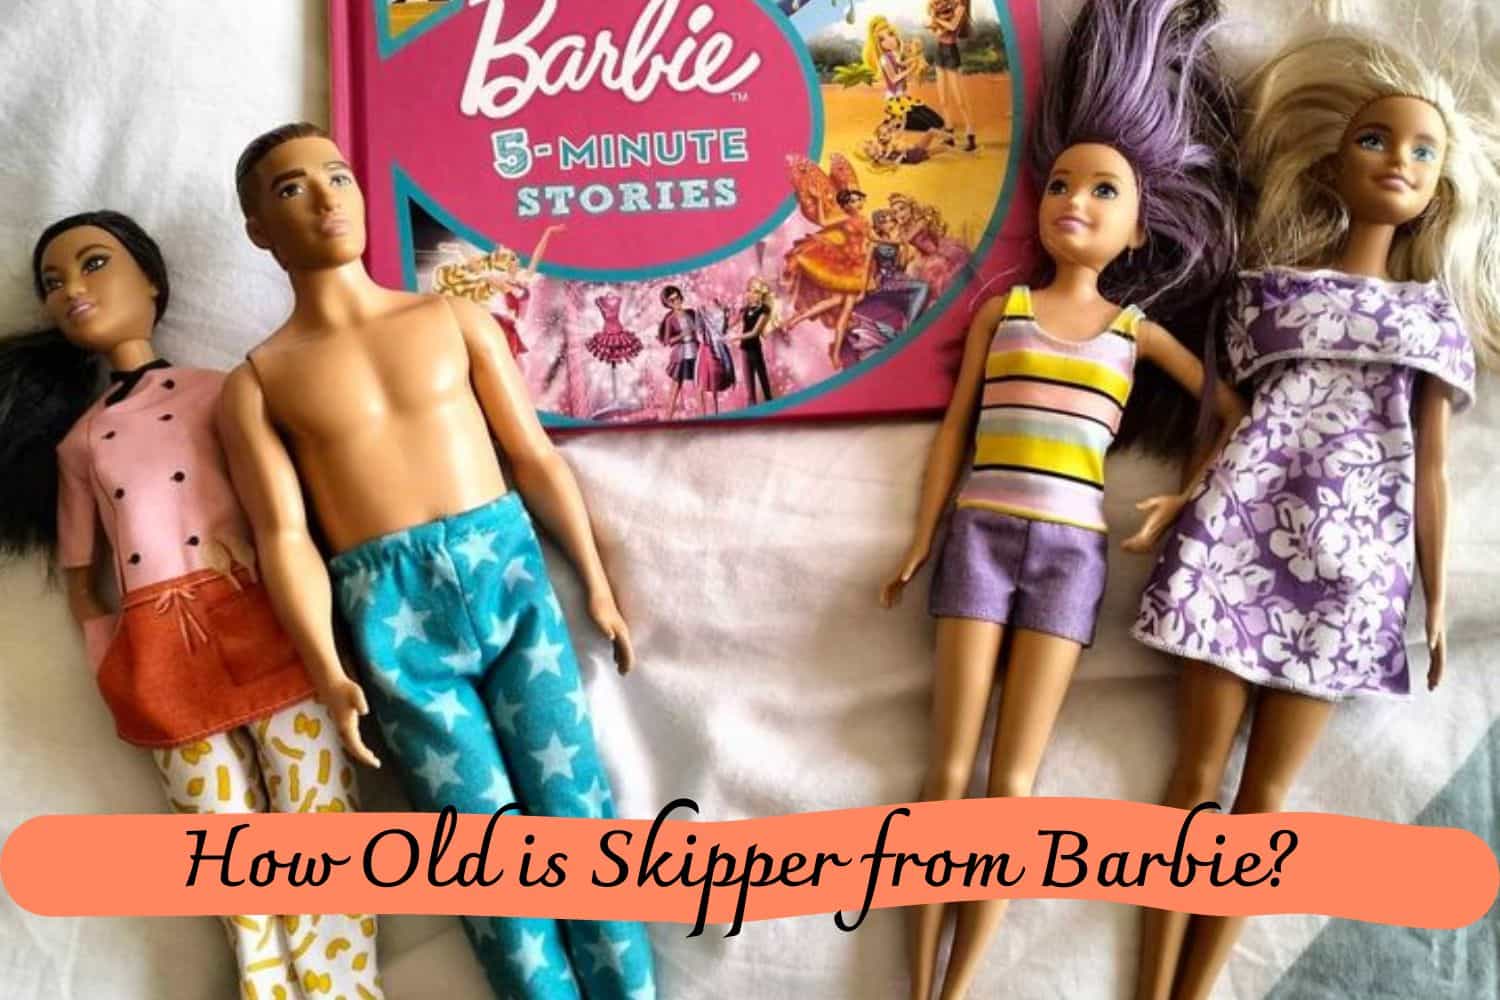 How Old is Skipper from Barbie?